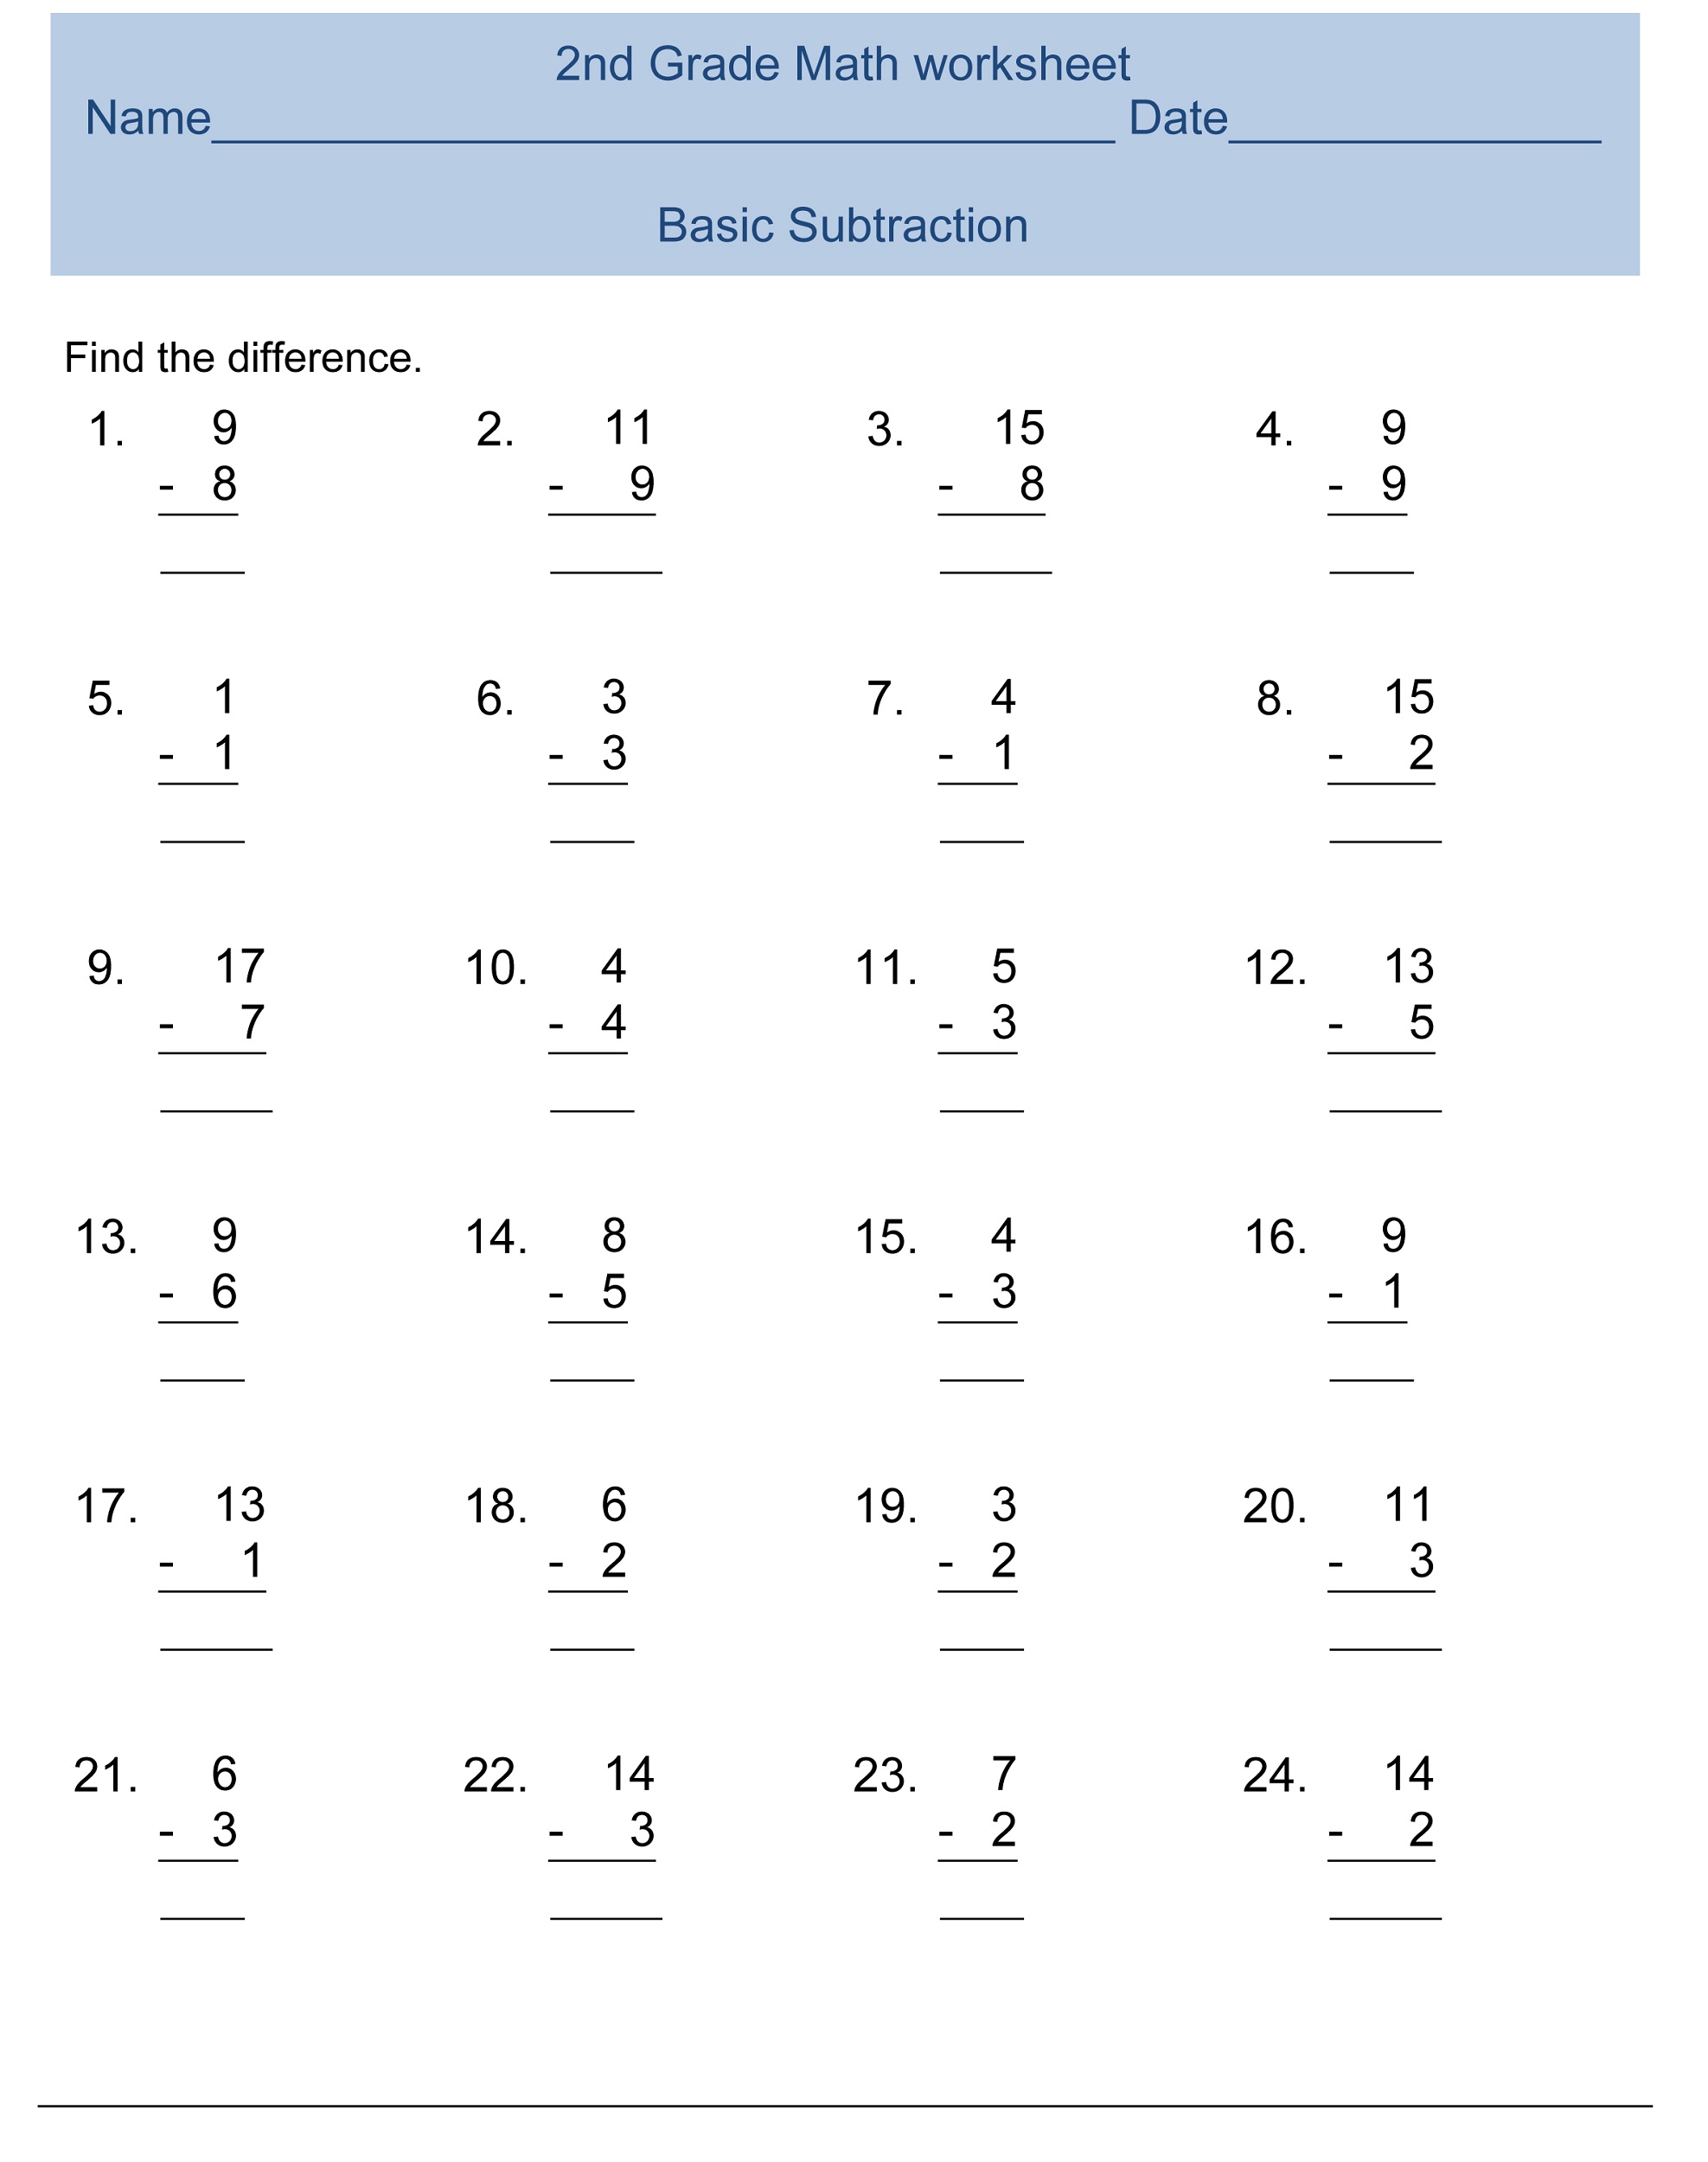 2nd Grade Math Worksheets Pdf Packet An Essential Tool For Learning Free 2nd Grade Math